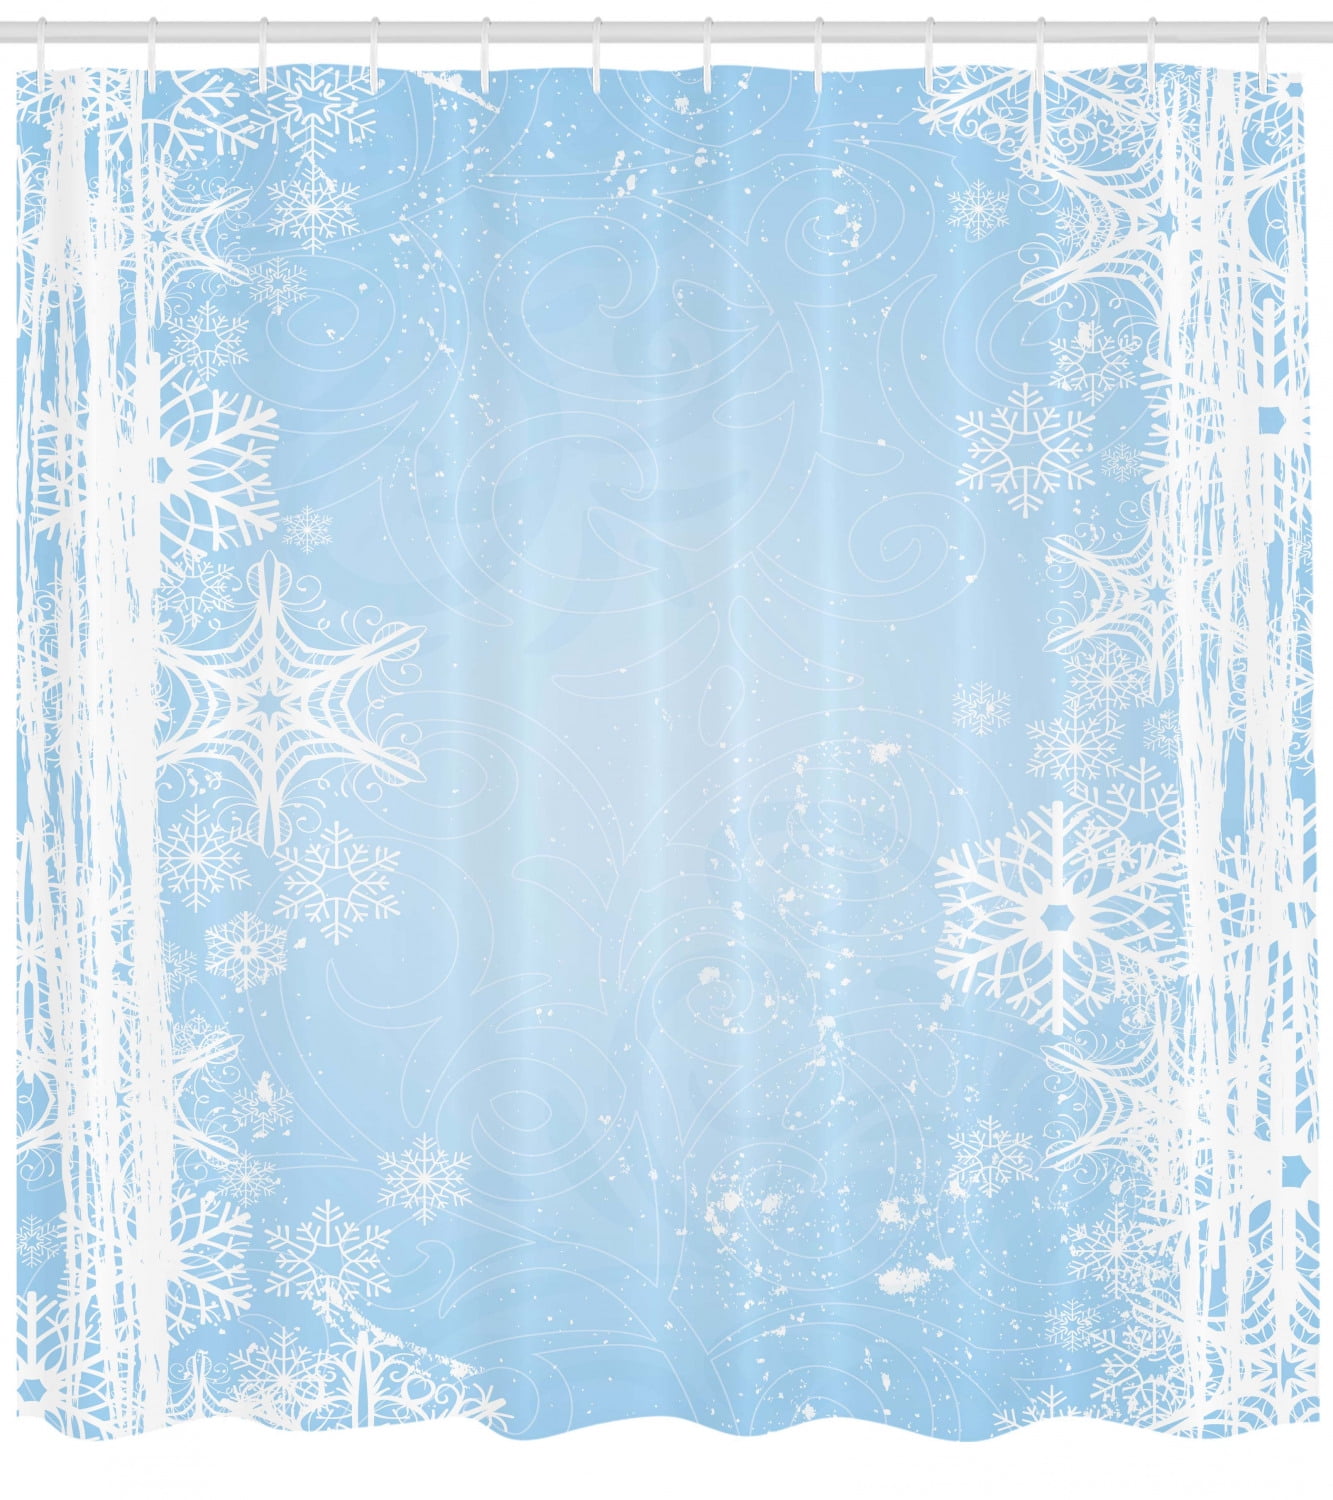 Available in White Snowflake Wall Decals Blue Winter Vinyl Home Decor Other Colors Silver Christmas 